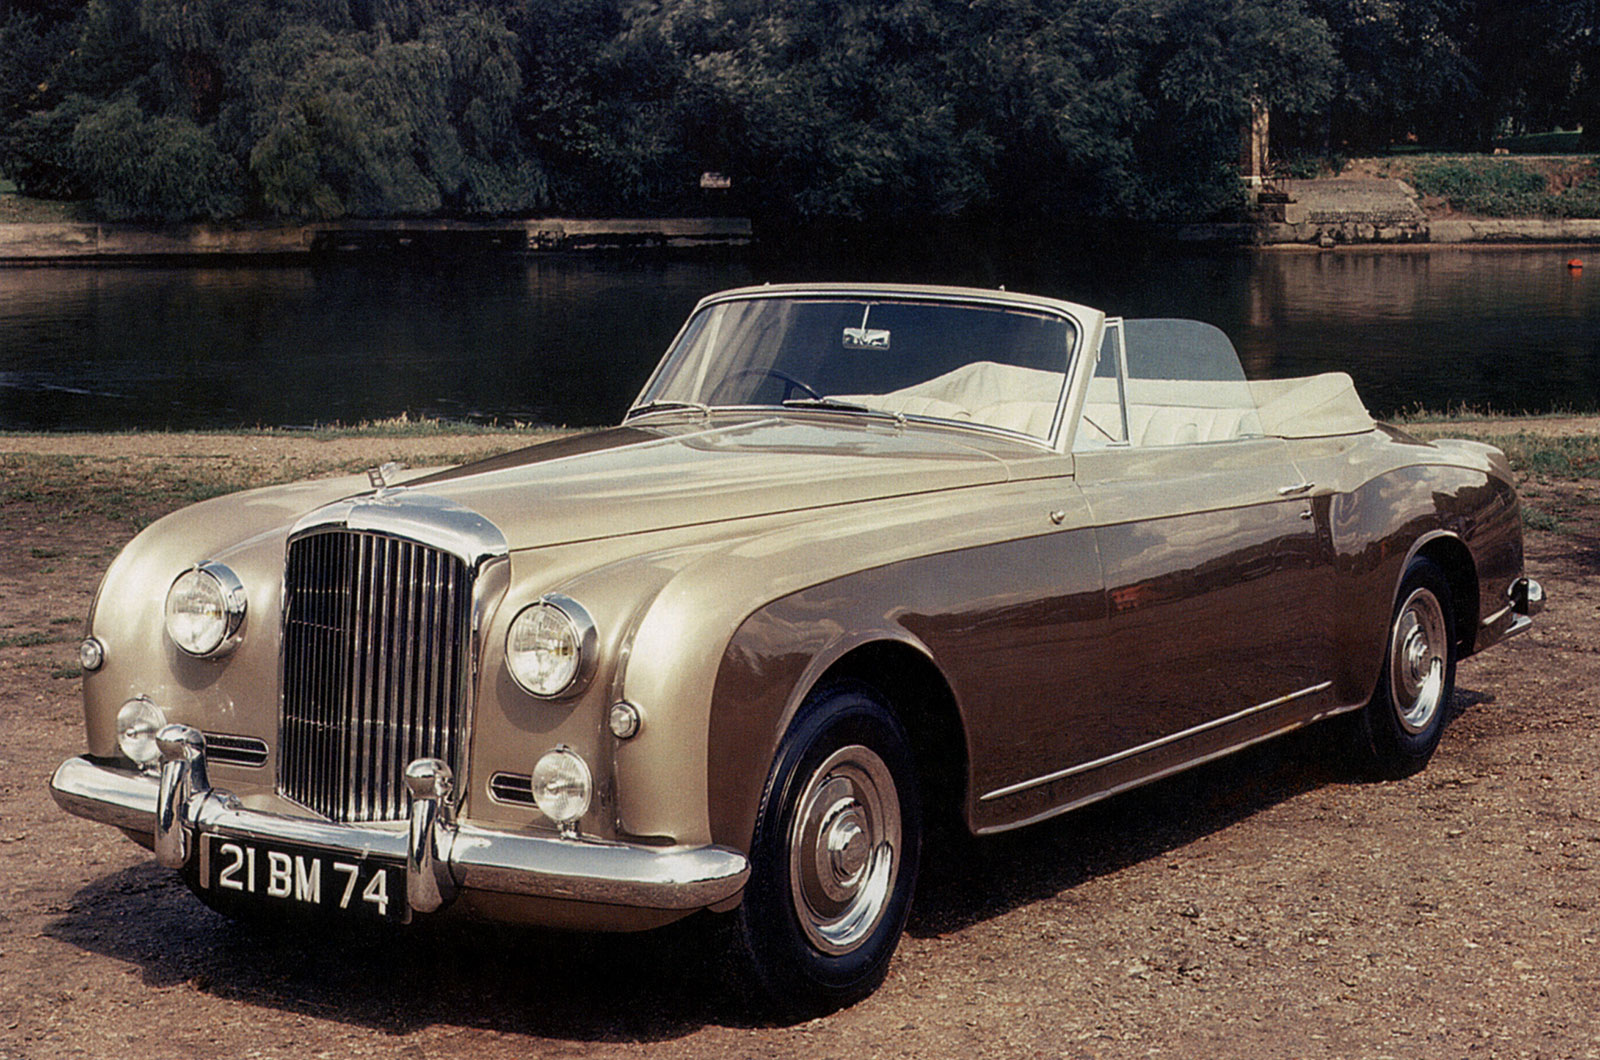 <p><span>While the S-Series was expensive and luxurious, for those who craved even more there was a Continental option, which wasn't offered to <strong>Rolls-Royce </strong>buyers. Available on all three iterations of the S-Series (S1, S2, S3), buyers could choose between two-door fixed-head or drophead coupe bodystyles, both more sporting than the regular four-door sedans.</span></p>